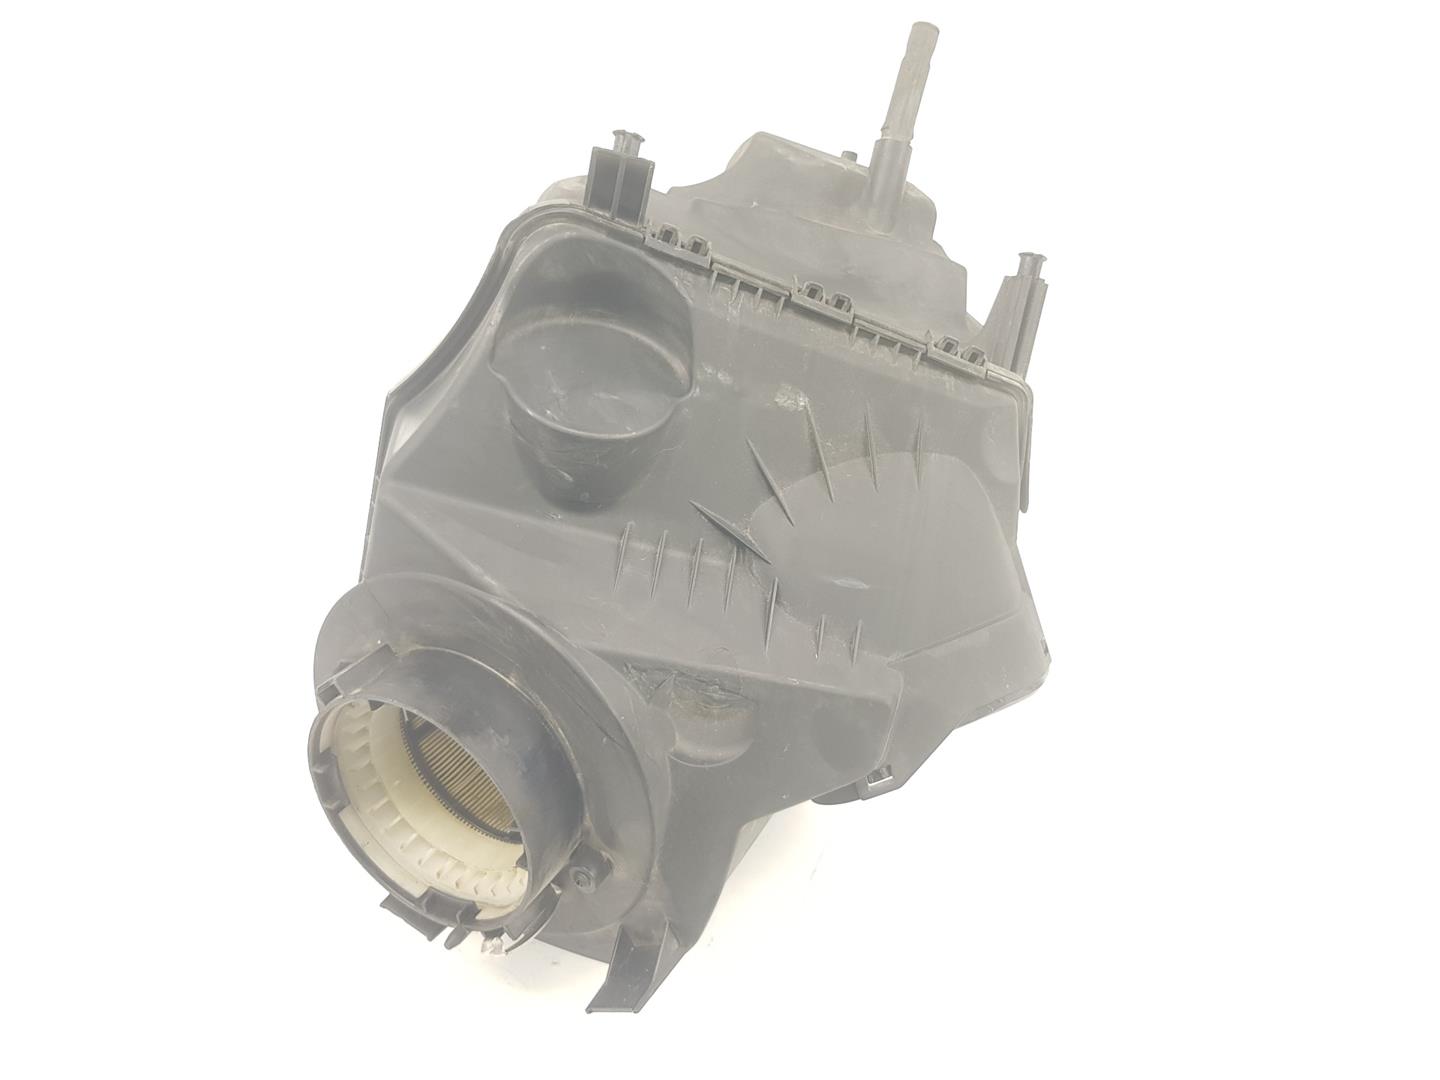 AUDI A6 C6/4F (2004-2011) Other Engine Compartment Parts 4F0133837BB, 4F0133837BB 19869554